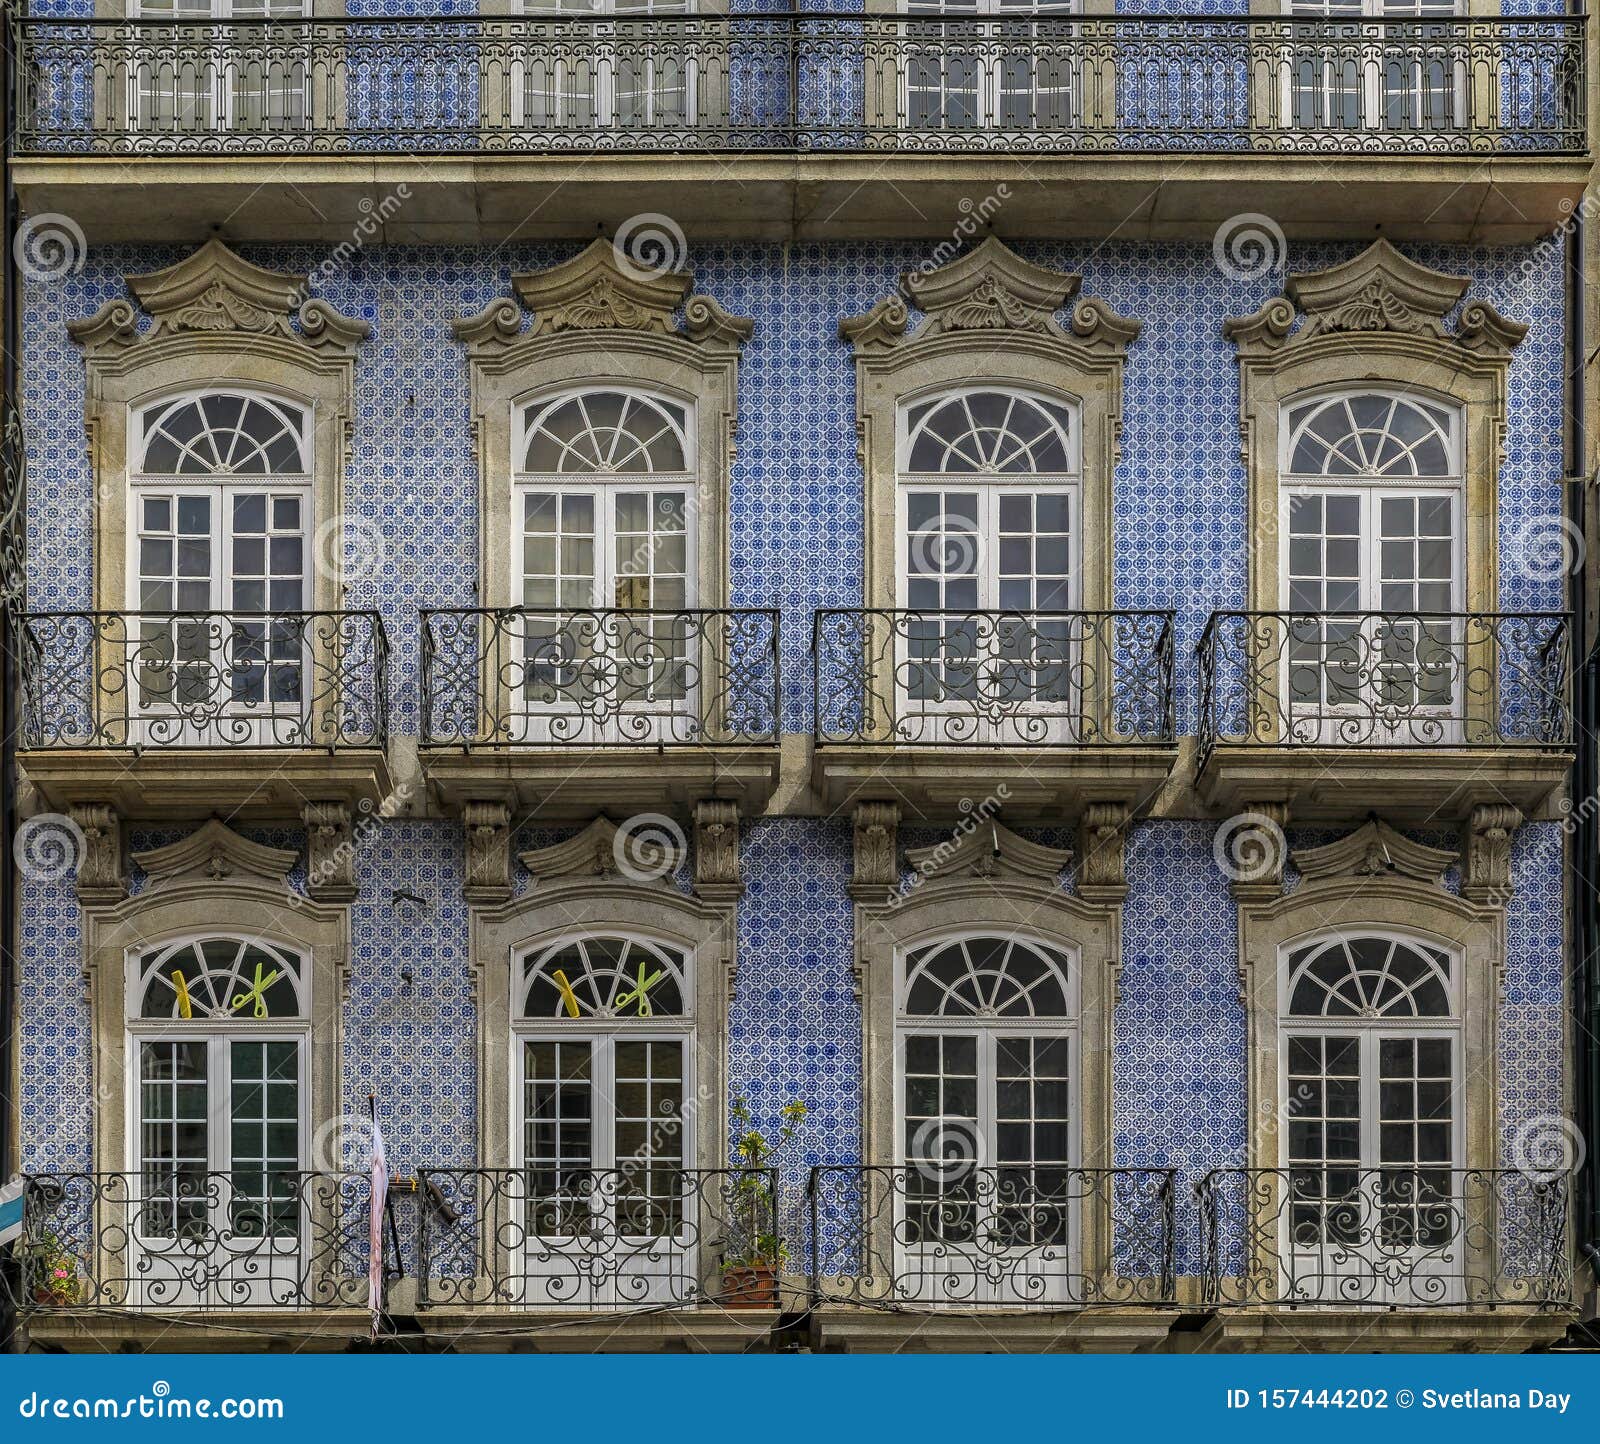 Collection 90+ Images where is this ornate tiled building? Excellent